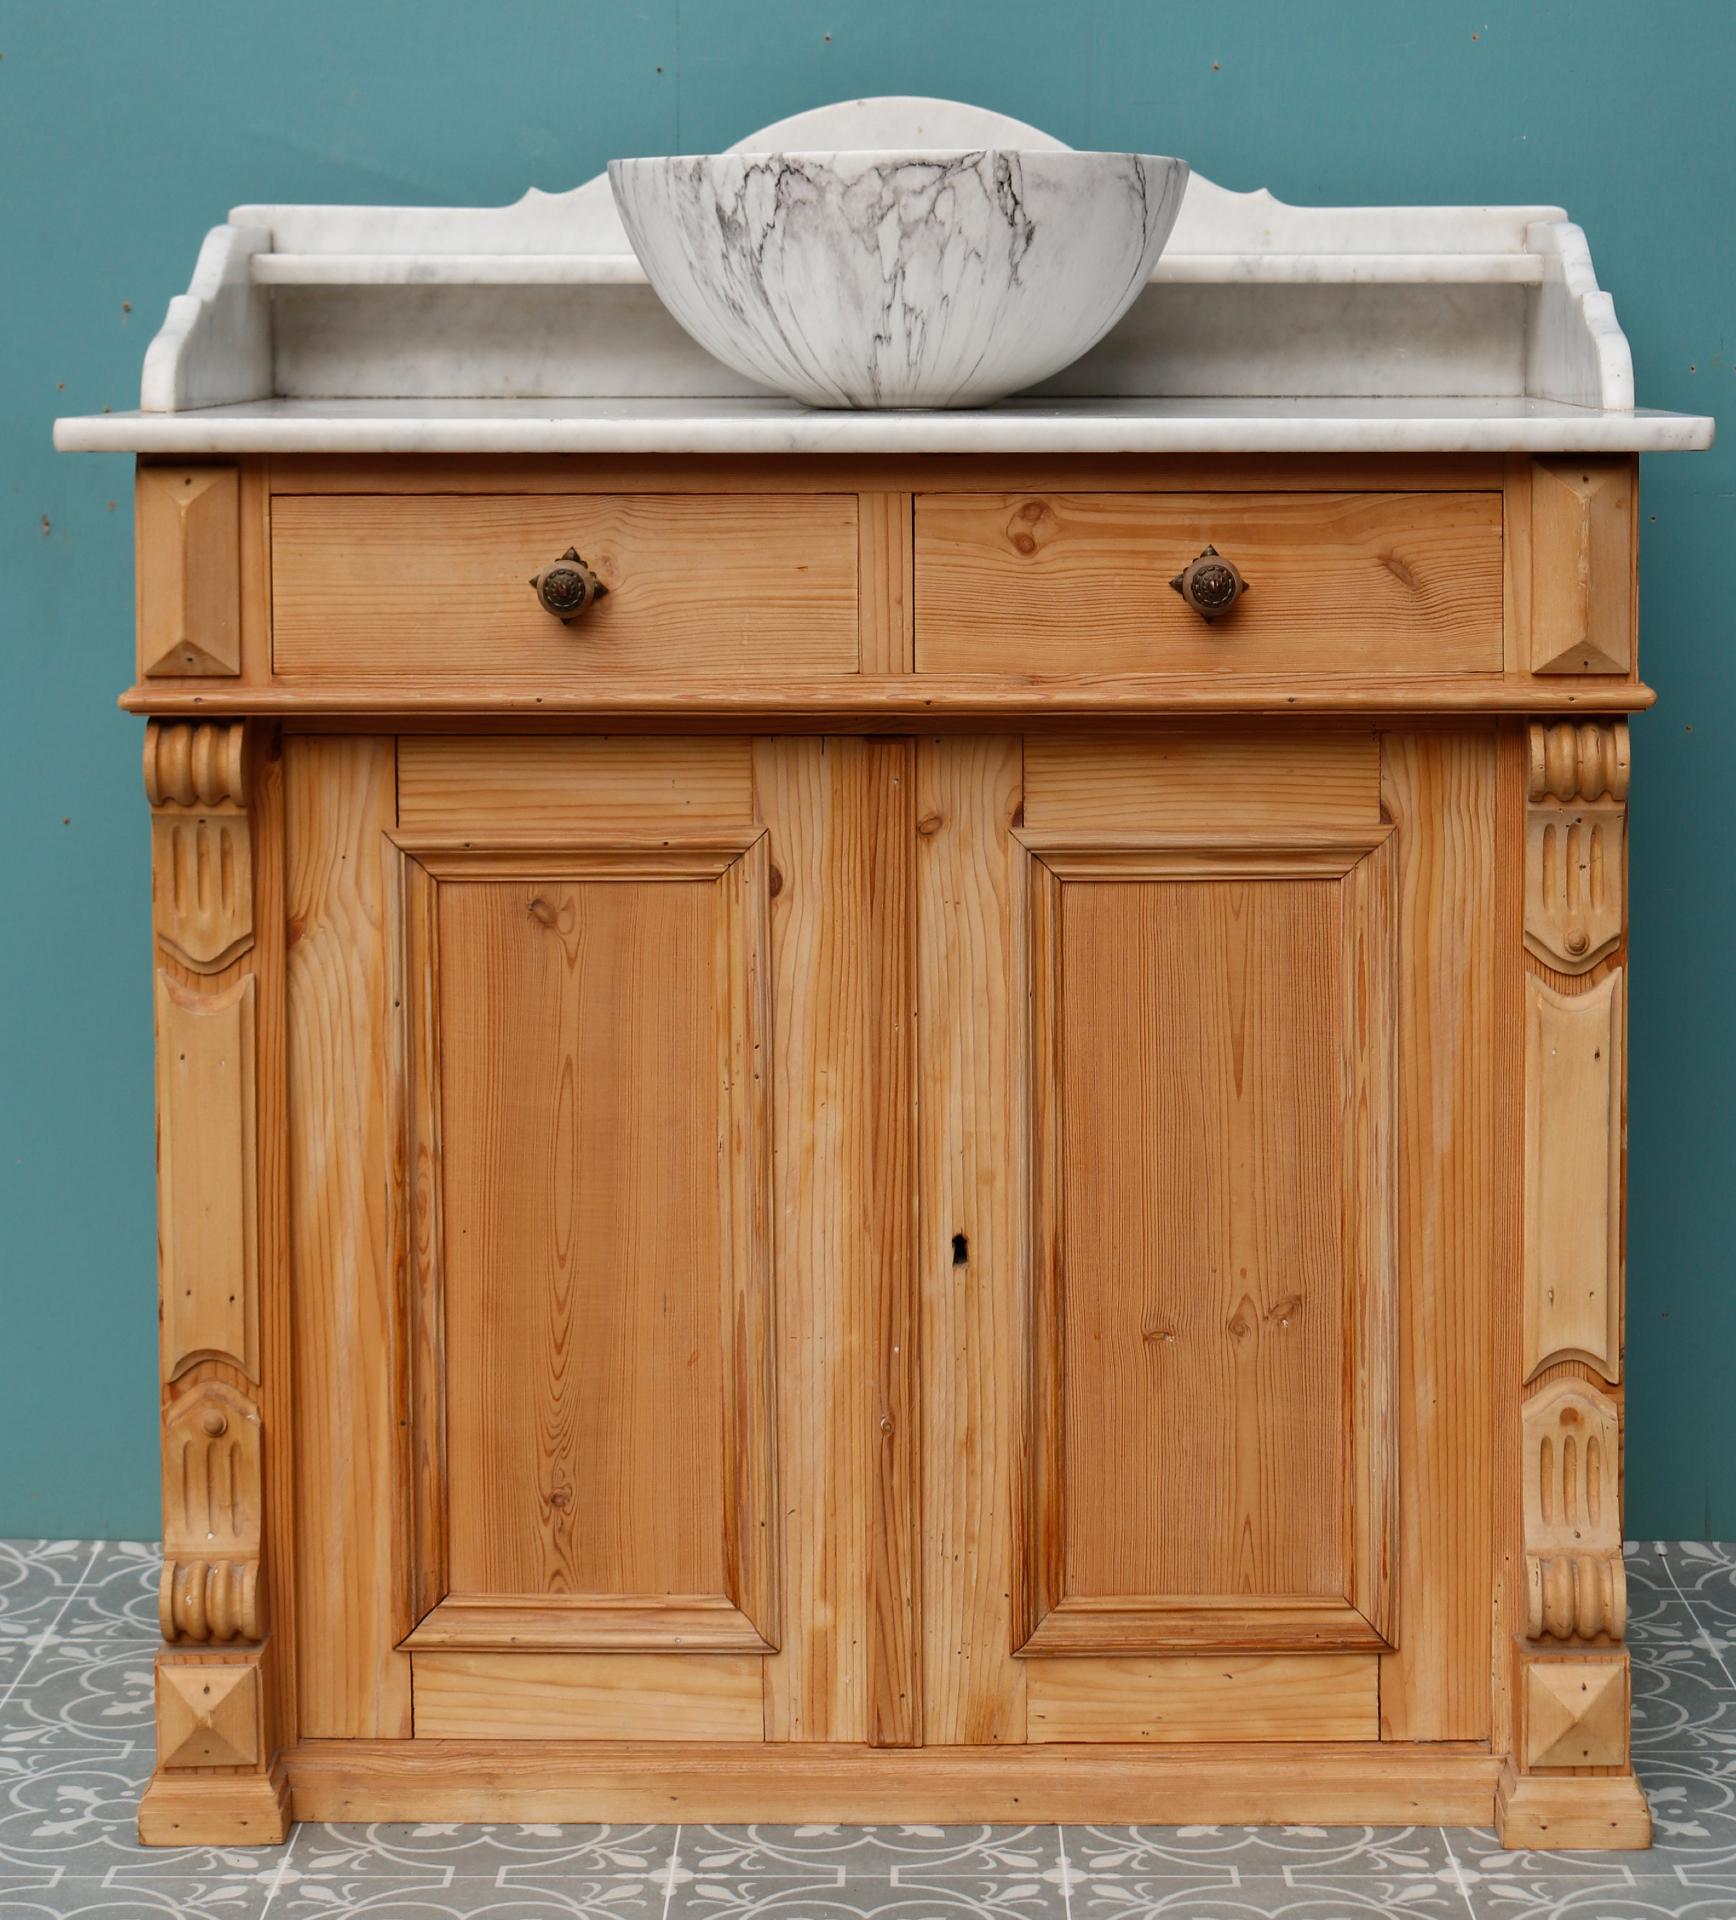 An antique Victorian style washstand constructed from pine with a Carrara marble top and splashback. Supplied with an antique style porcelain bowl.
 
Additional Dimensions:
 
Bowl external diameter 32.5 cm
 
Counter  height 75 cm